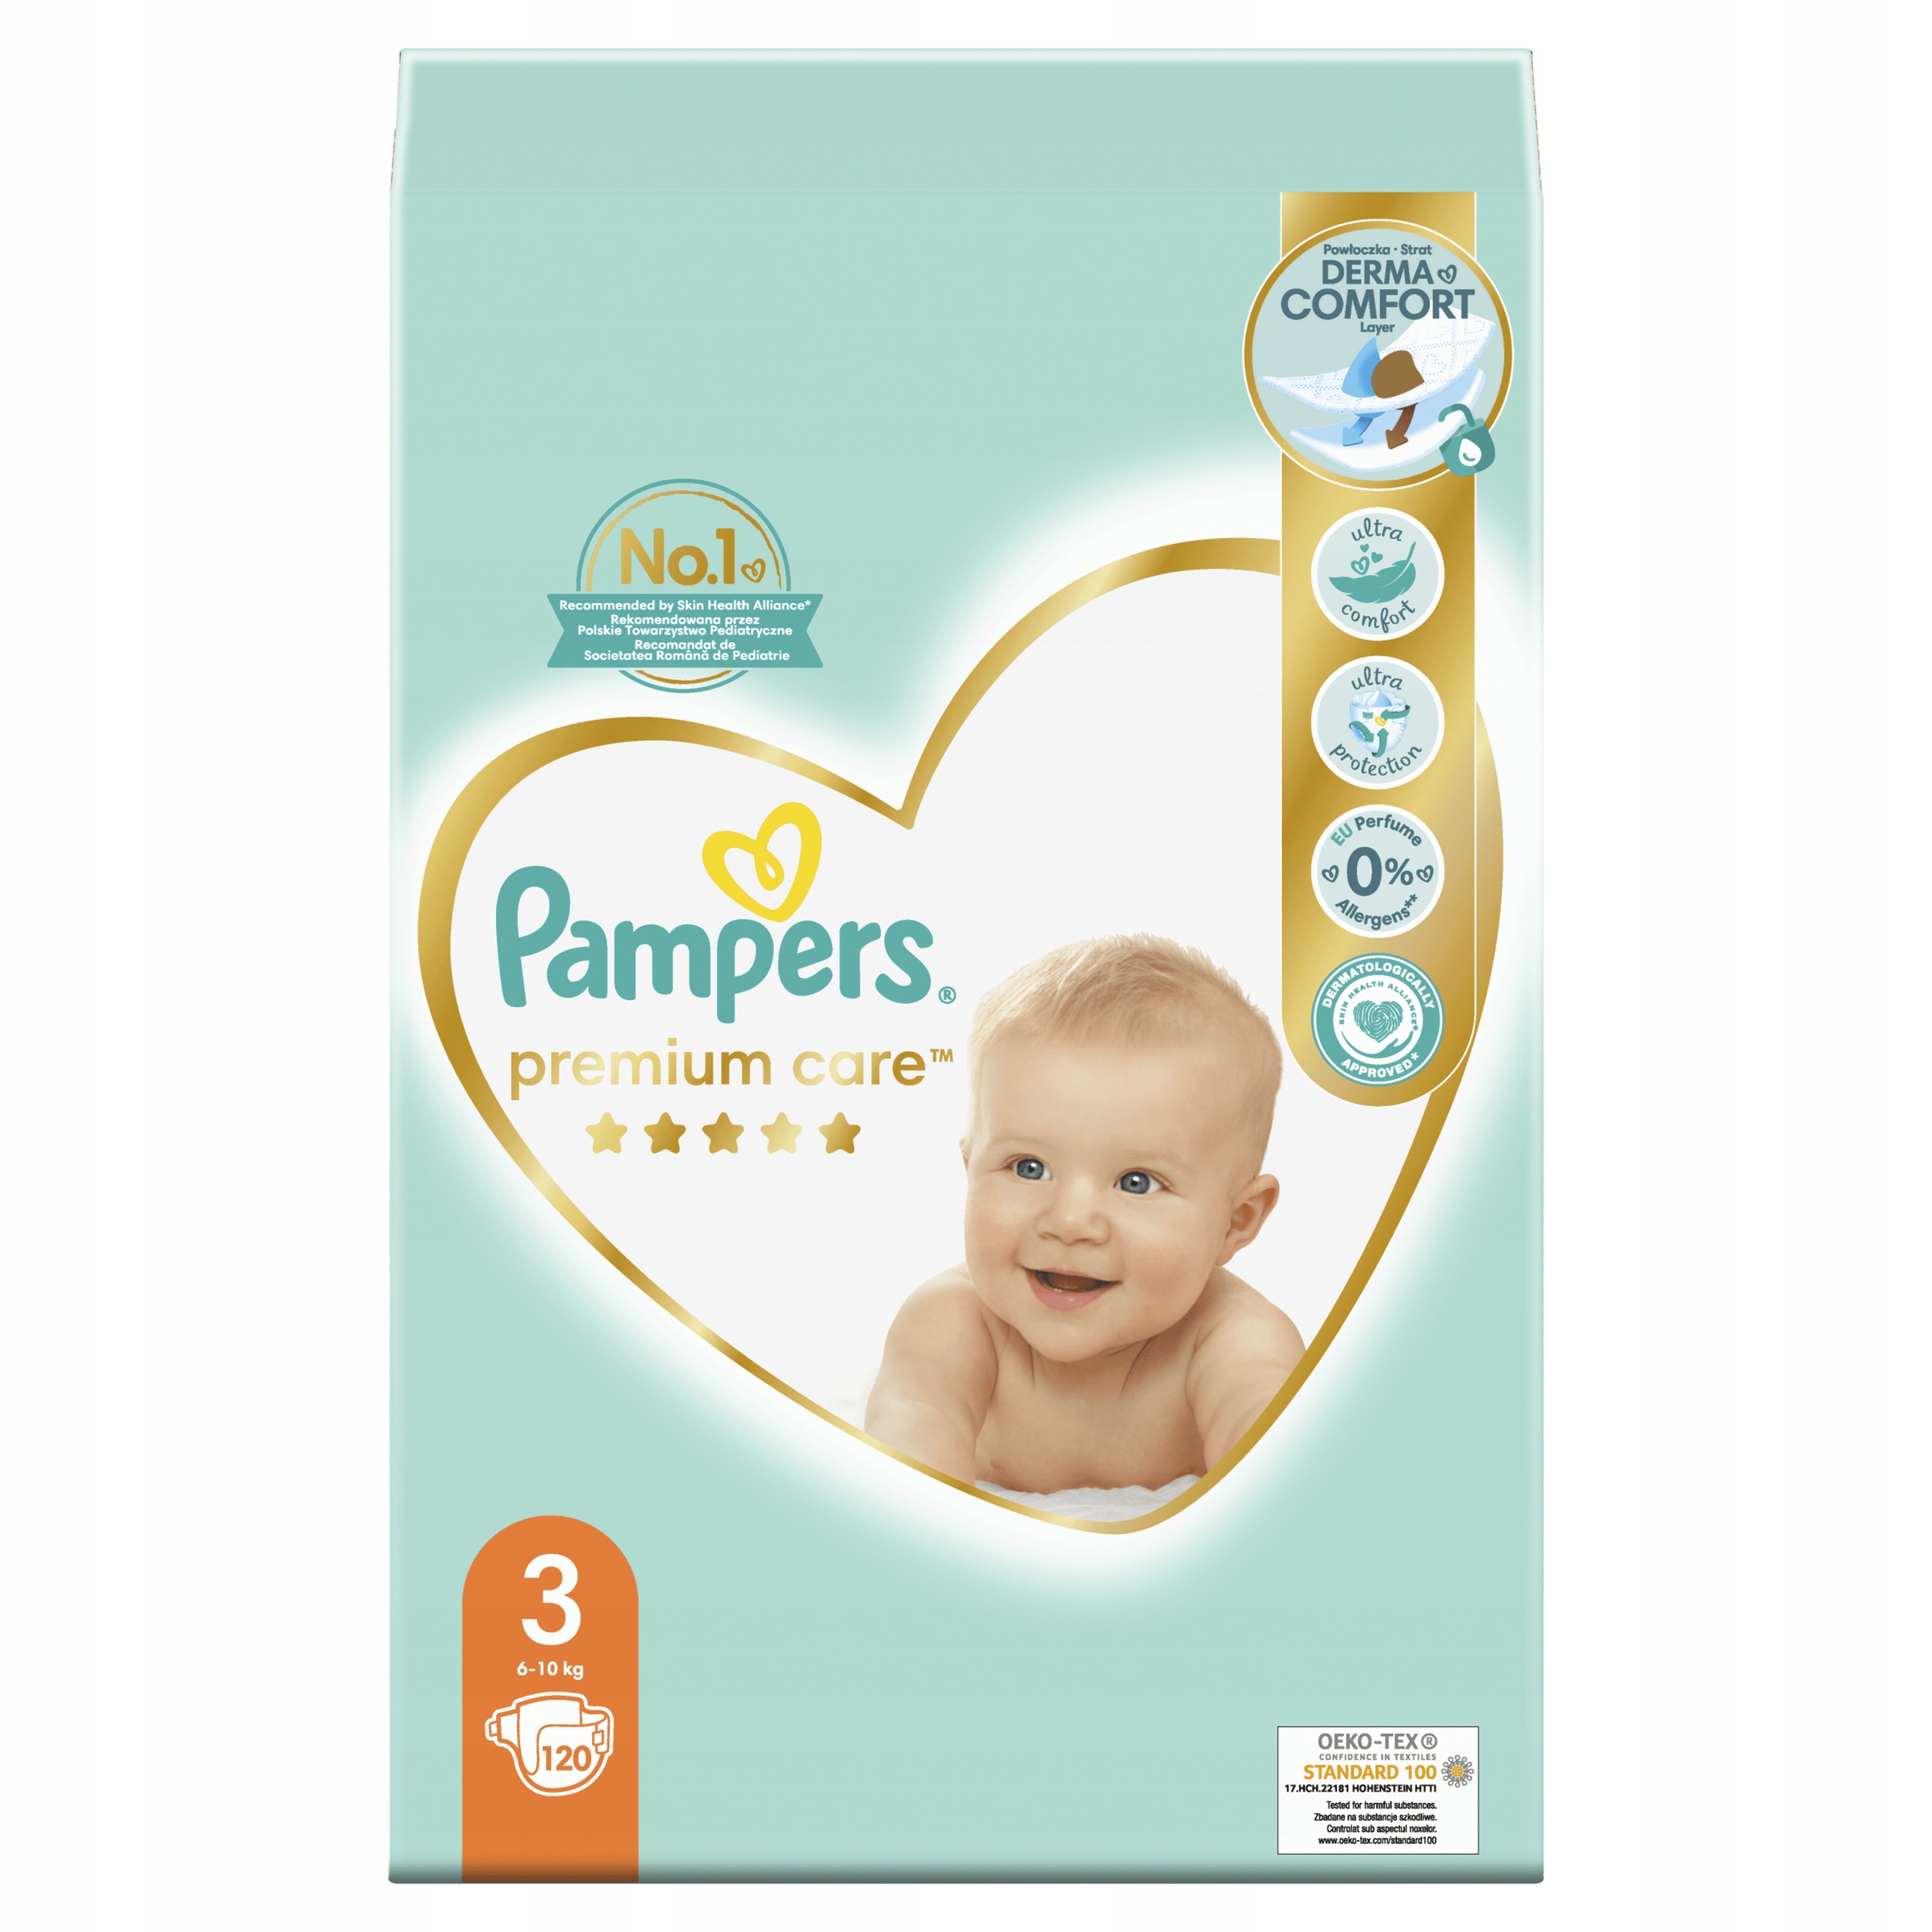 pampers active baby-dry rozmiar 3